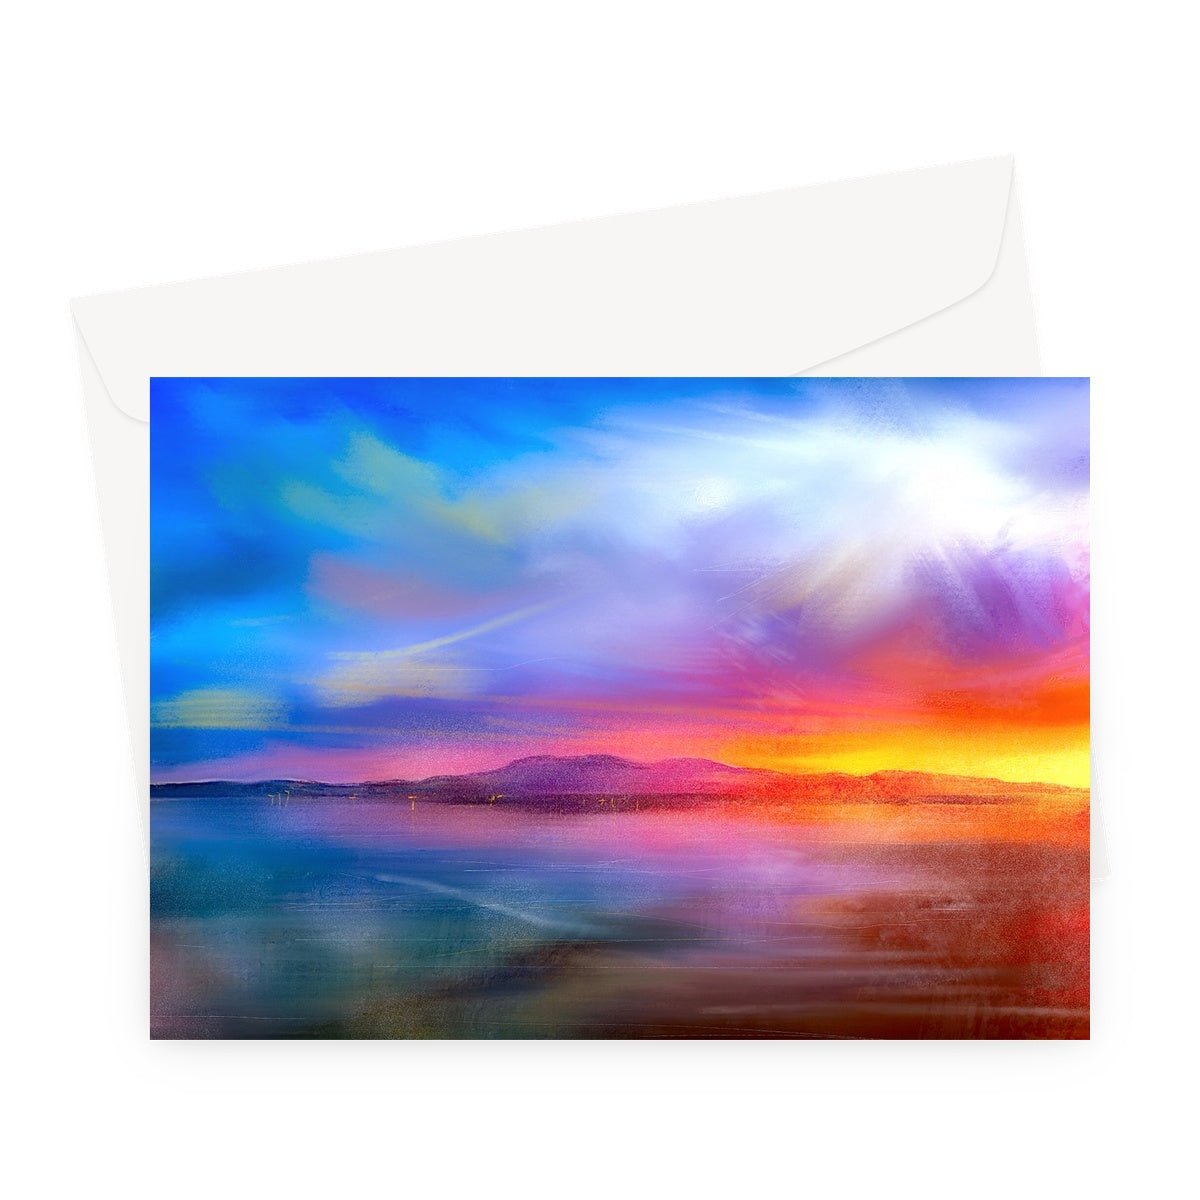 Arran Sunset Art Gift Greeting Card-Greetings Cards-Arran Art Gallery-A5 Landscape-10 Cards-Paintings, Prints, Homeware, Art Gifts From Scotland By Scottish Artist Kevin Hunter